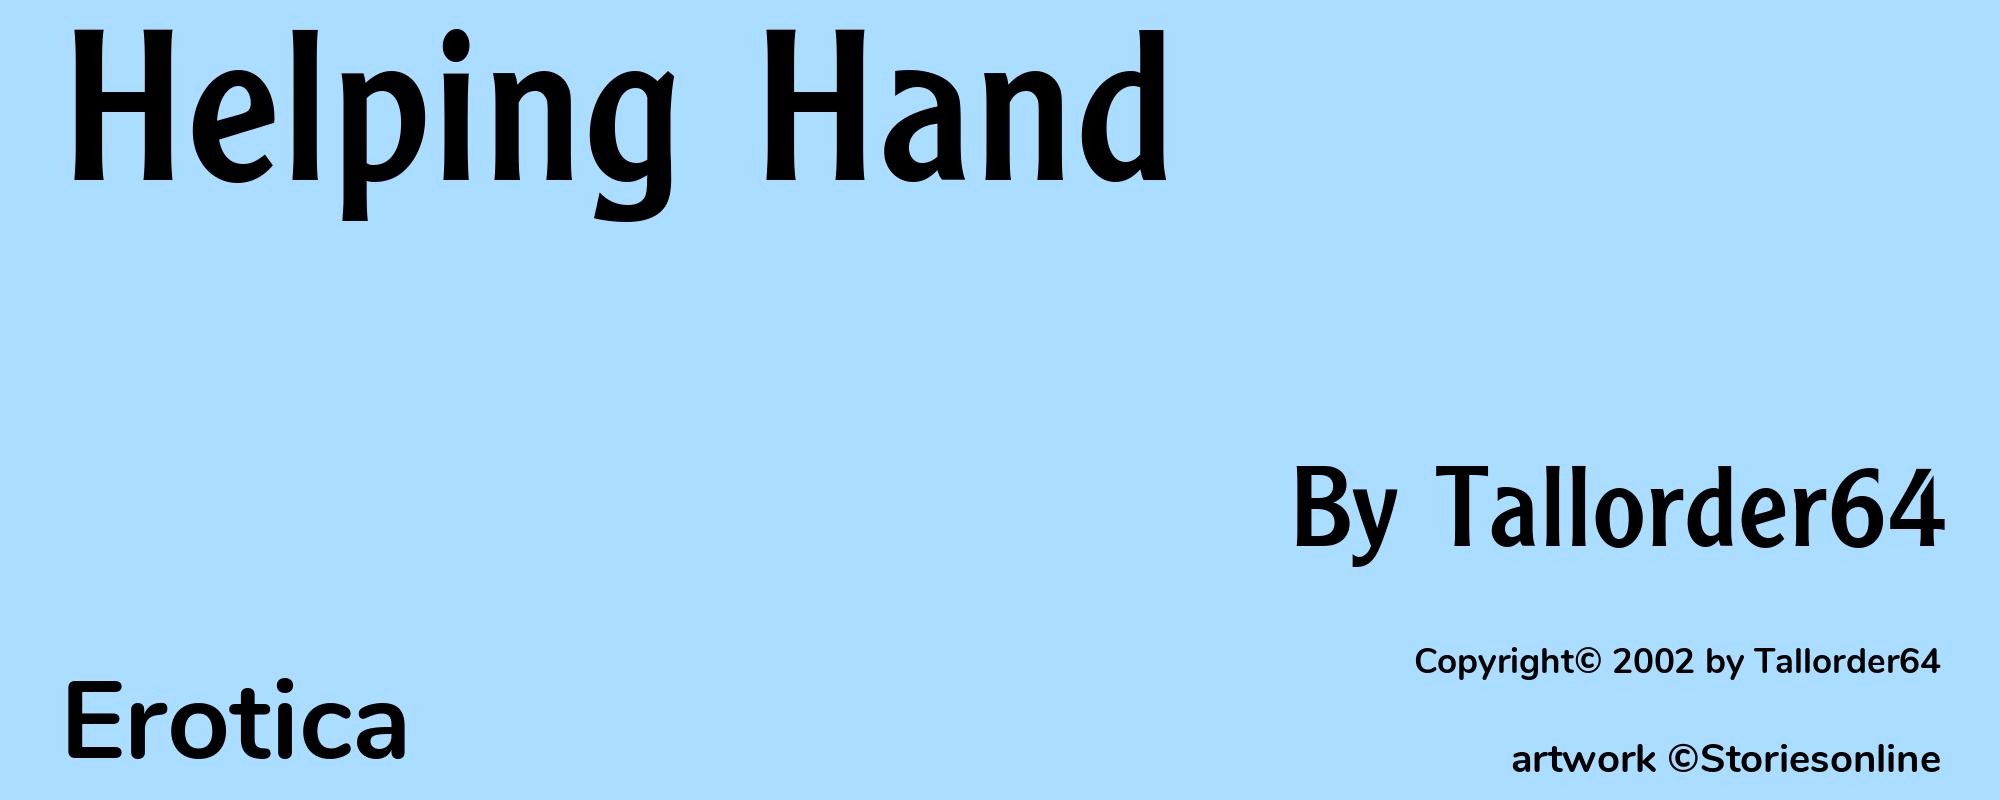 Helping Hand - Cover